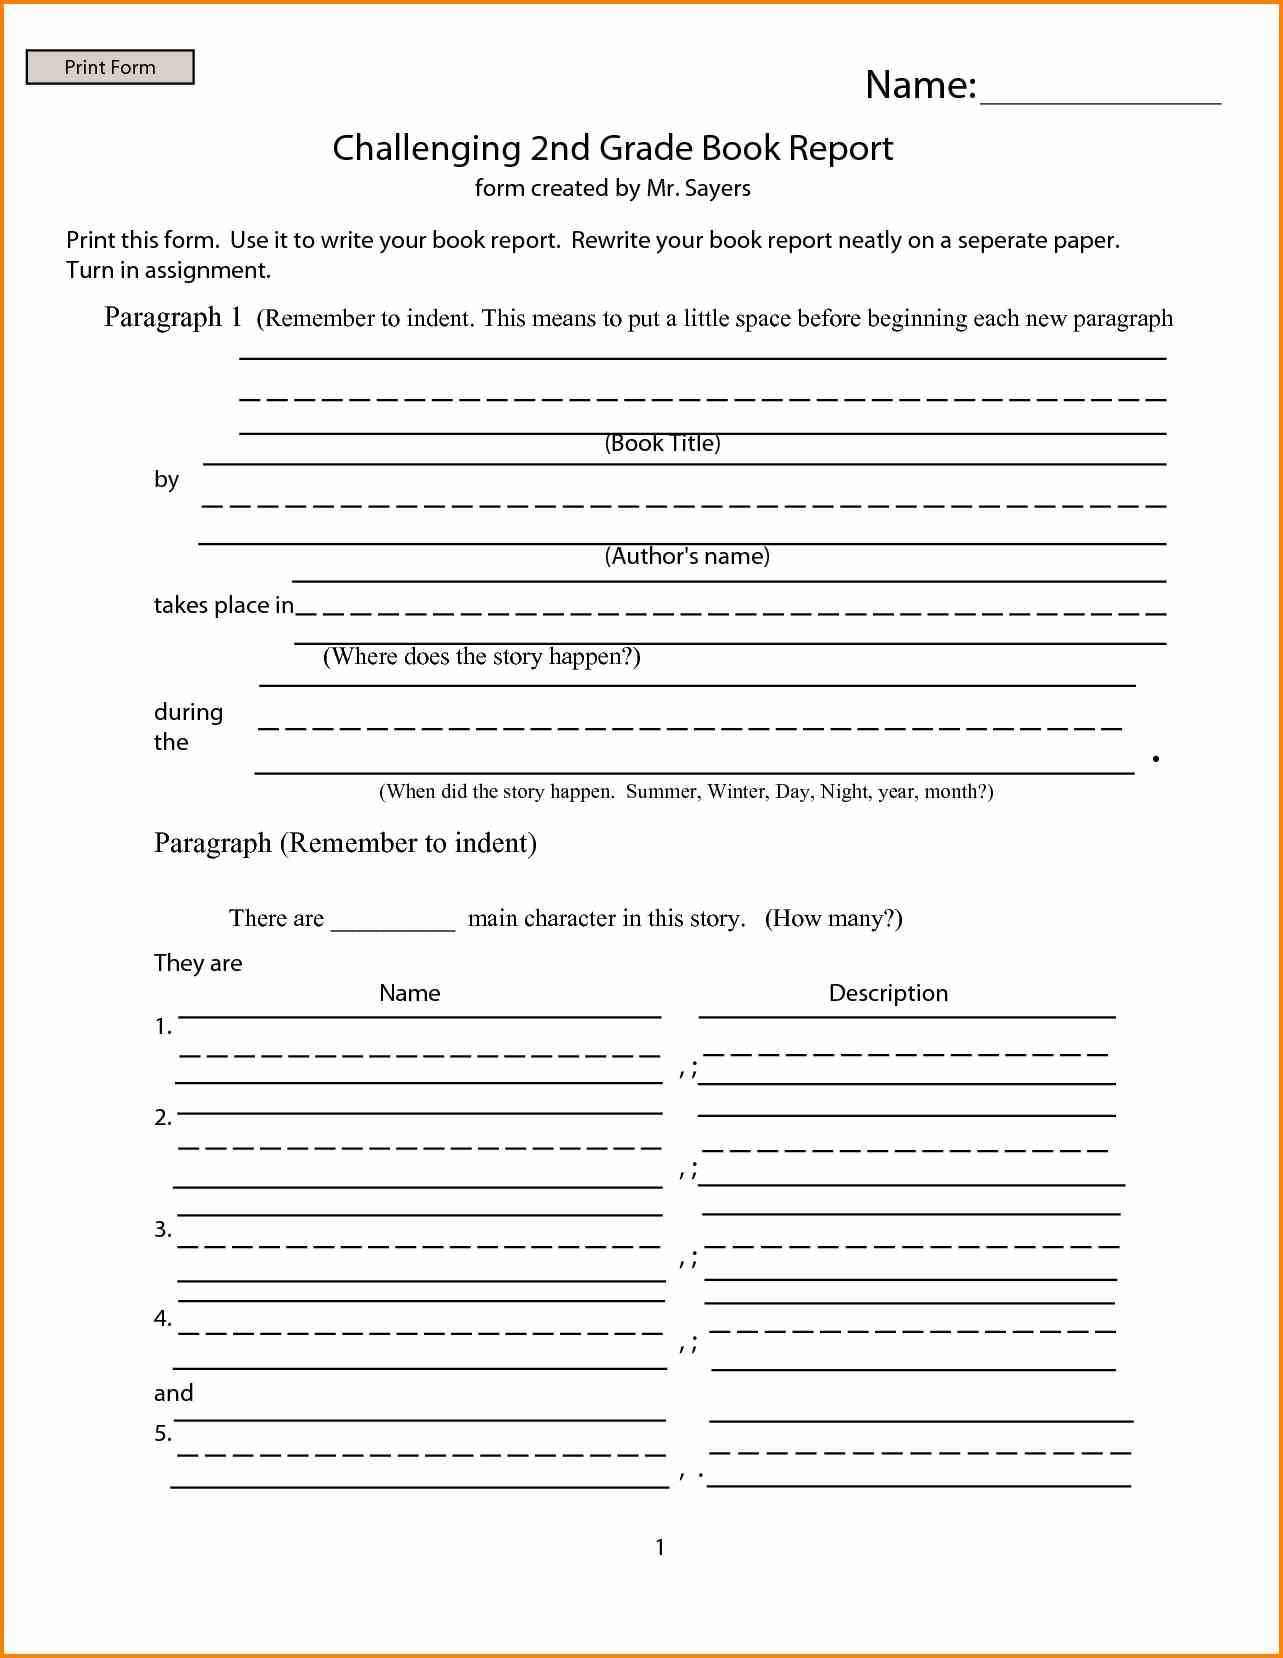 12 Book Report Templates For 2Nd Grade | Proposal Resume For Book Report Template 2Nd Grade